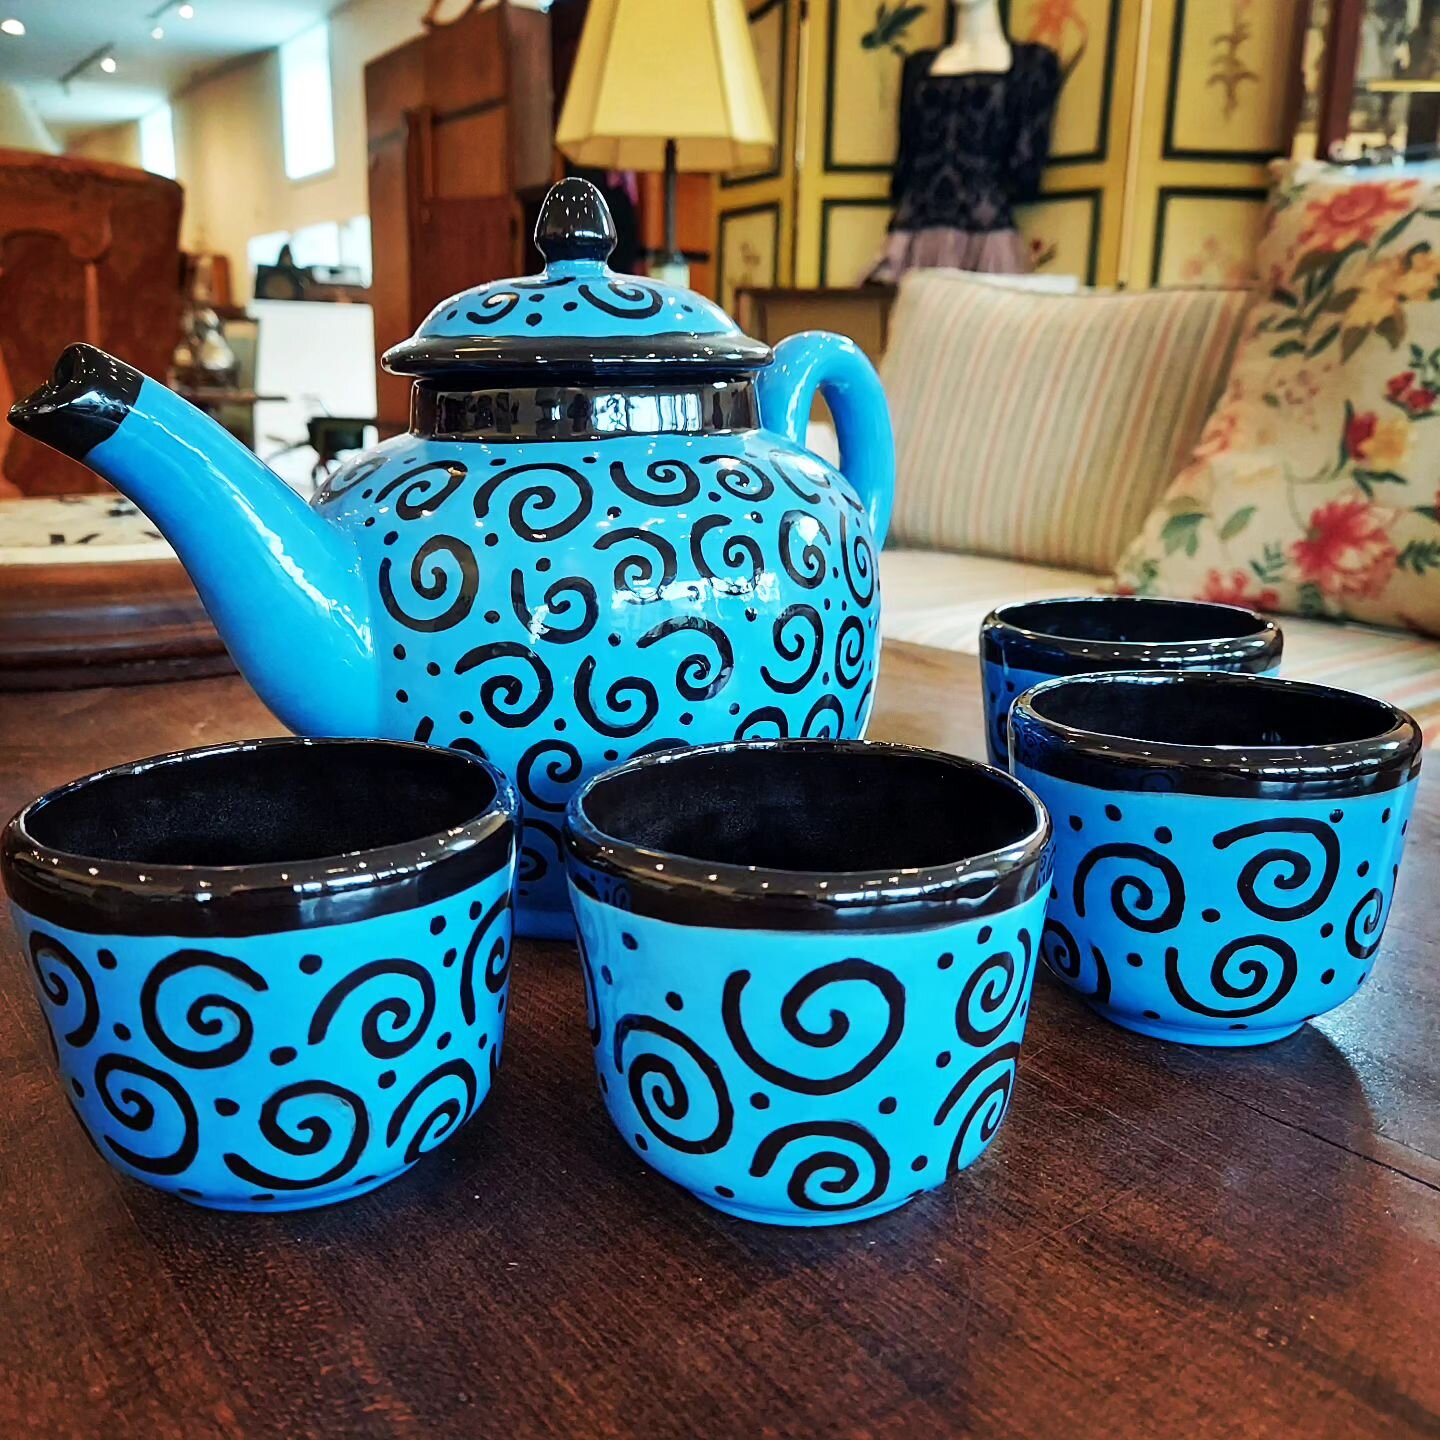 Groovy tea pot with 4 cups for sharing.

#vintage #vintagestyle #vintagestore